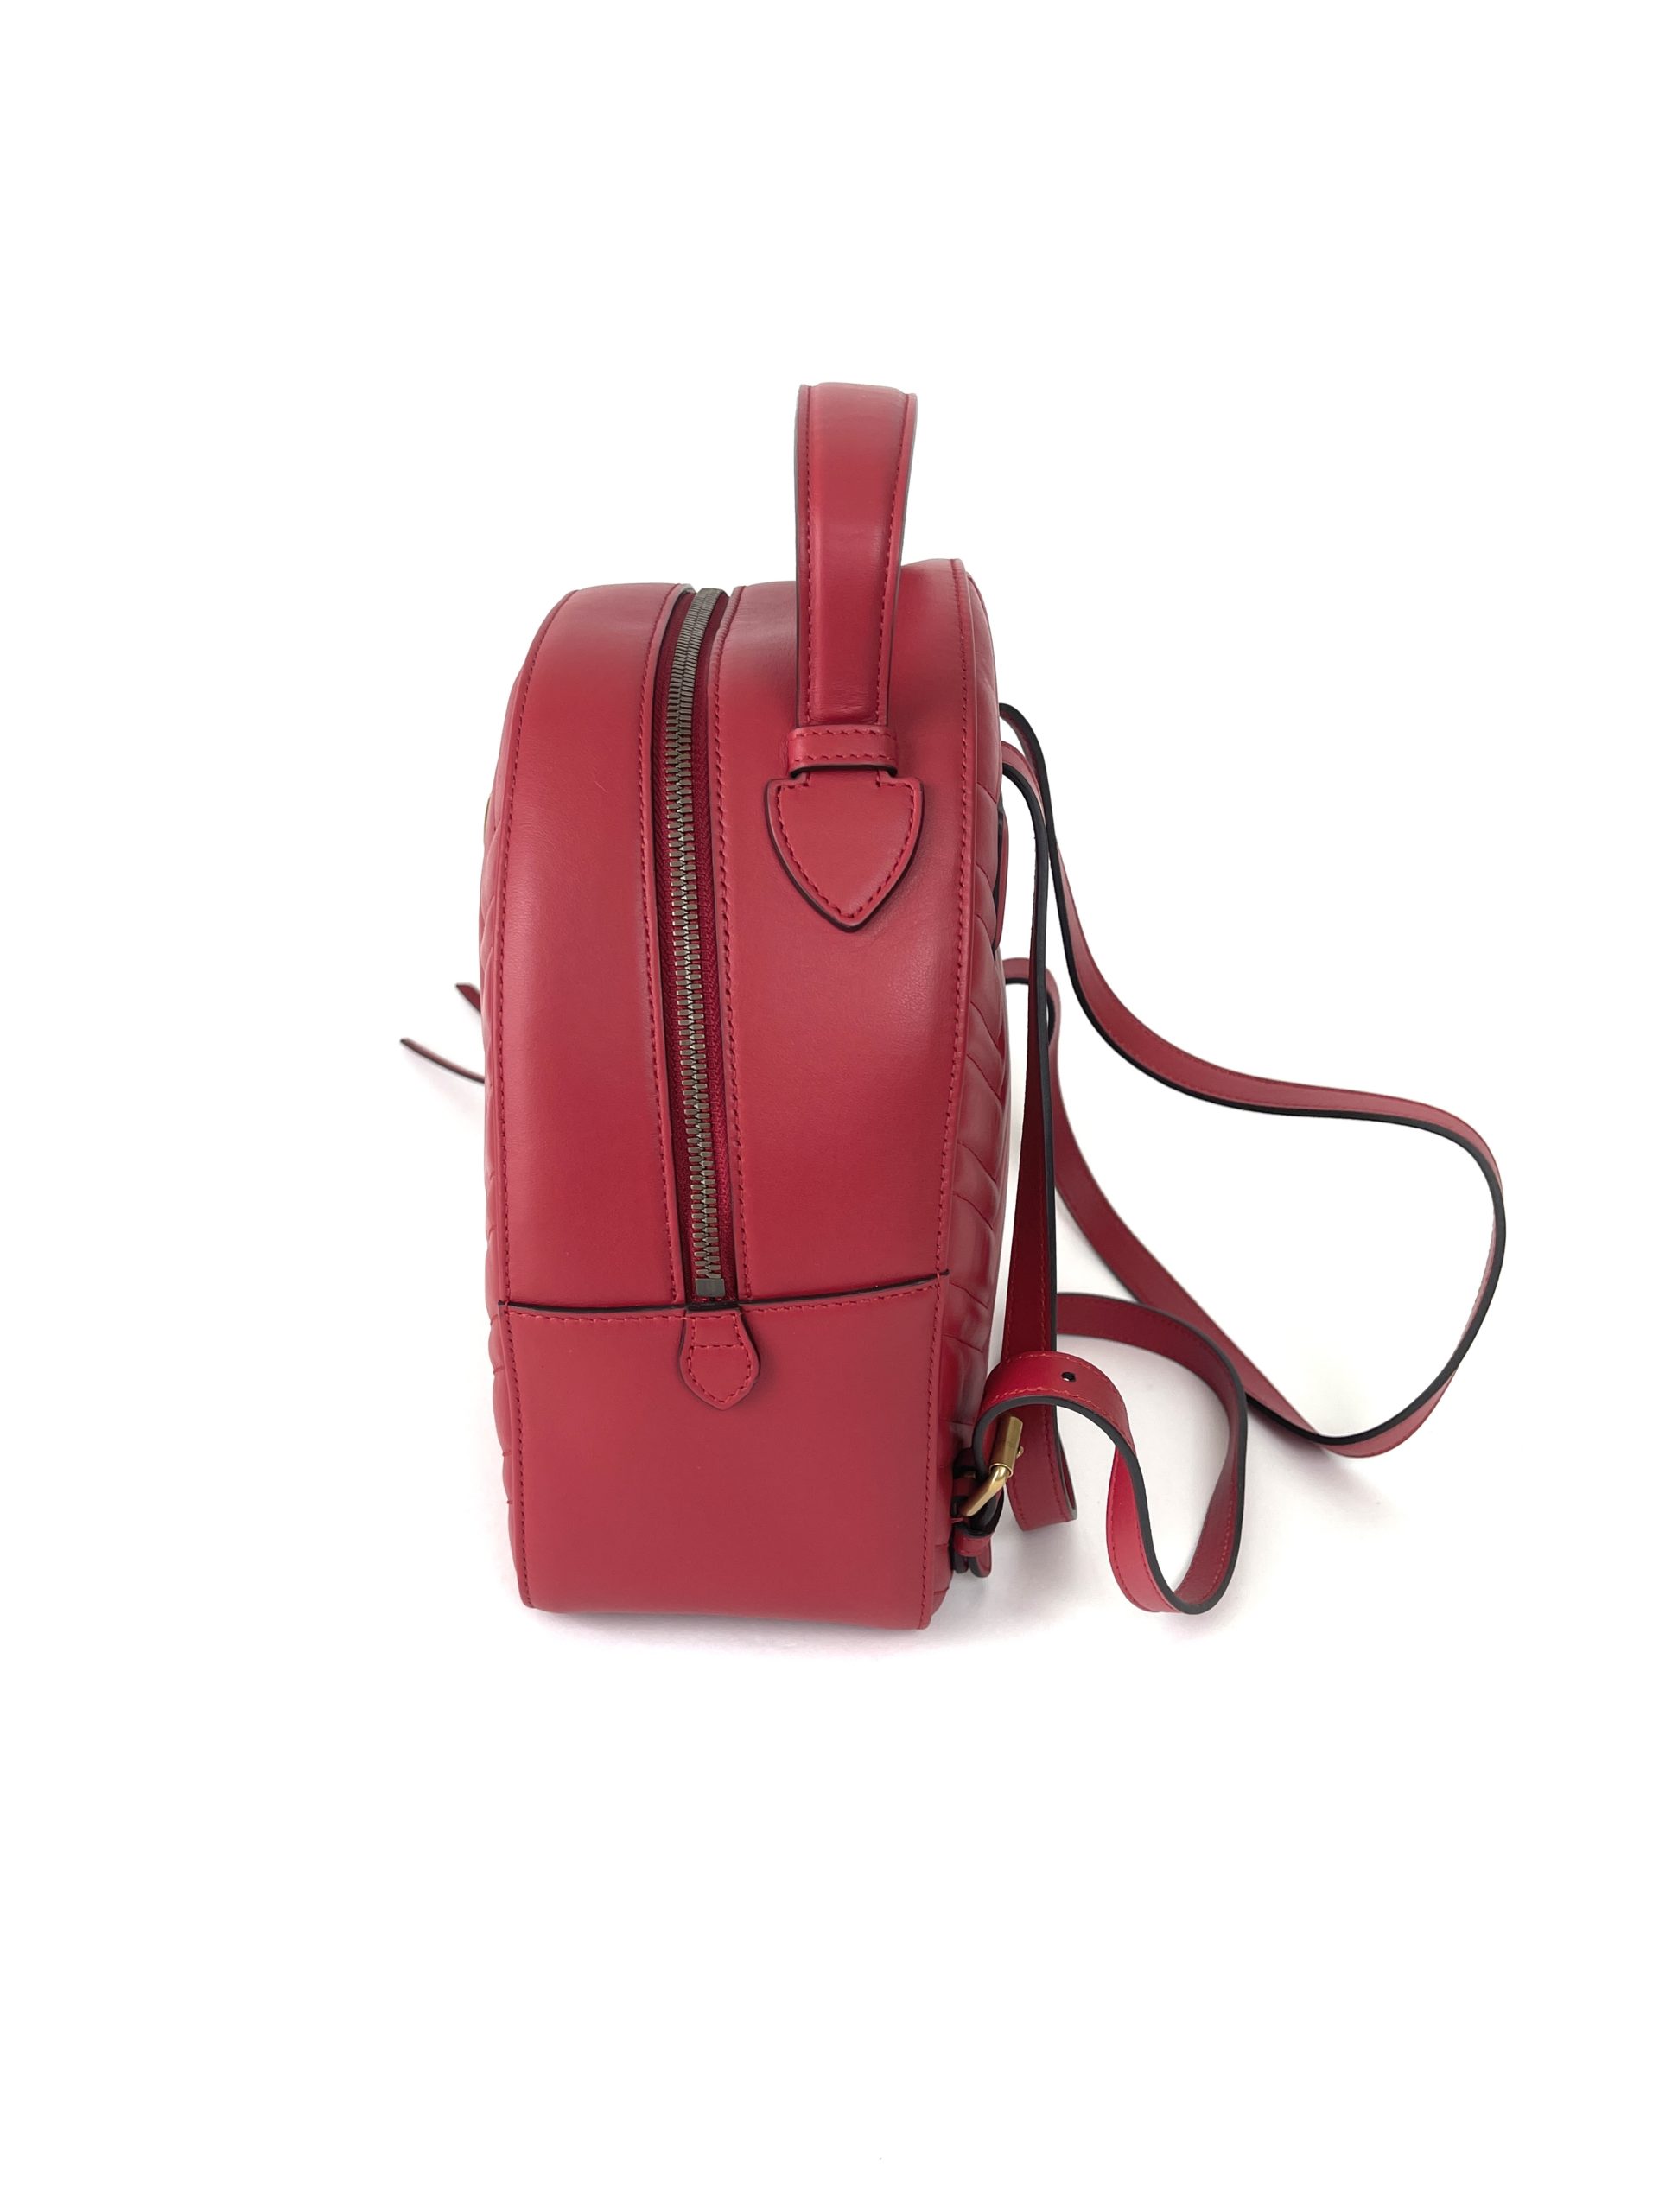 Gucci Red Matelassé Leather GG Marmont Backpack Gucci